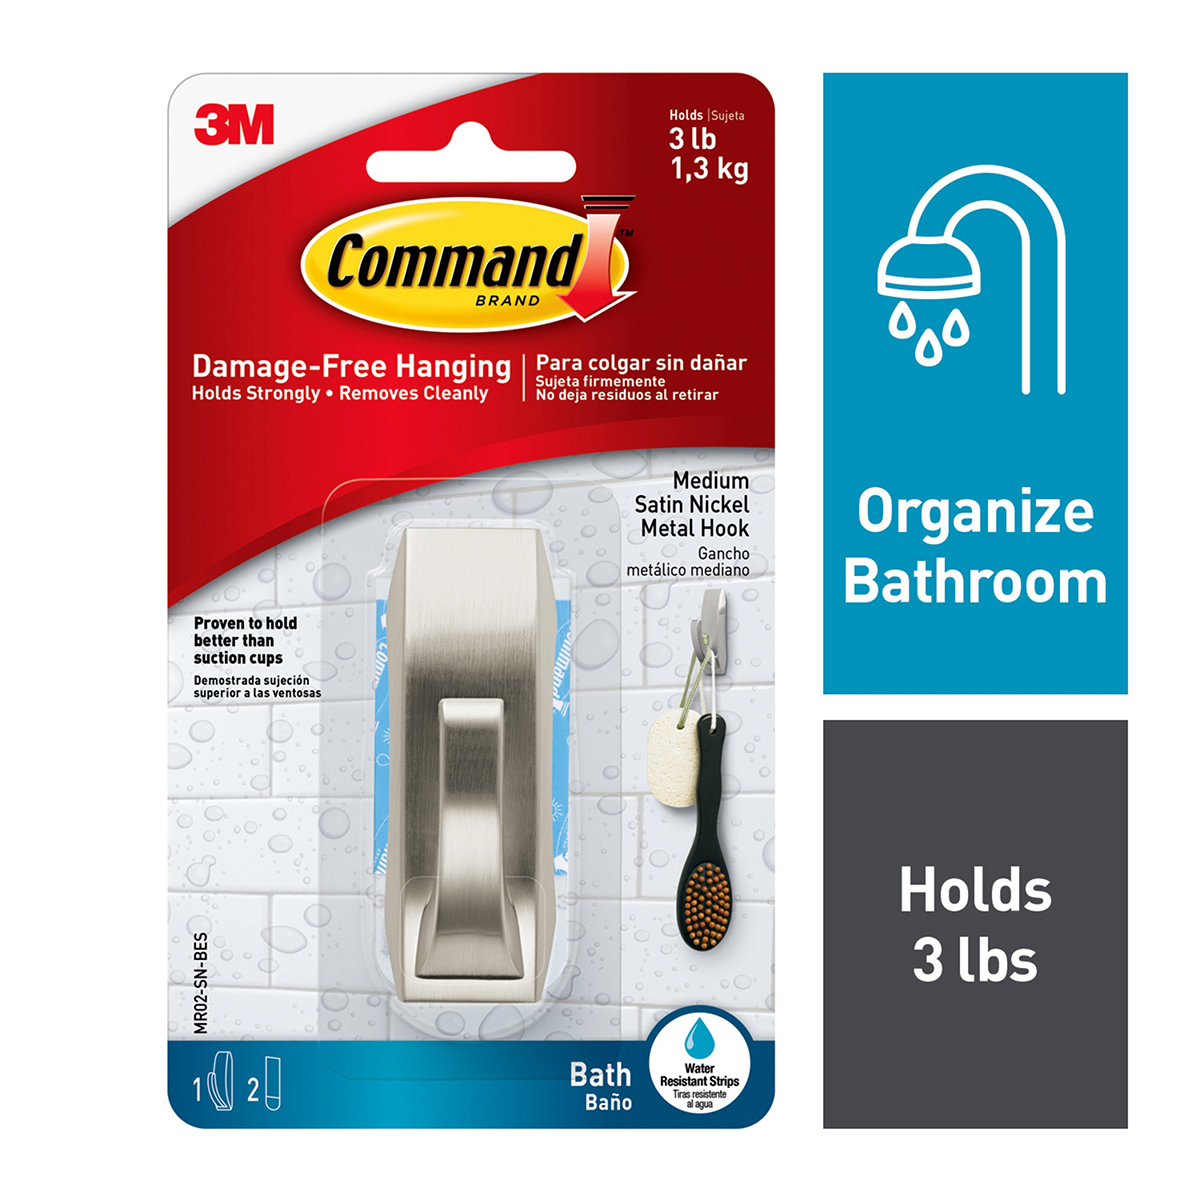 3M Command Water-Resistant Hooks | The Container Store